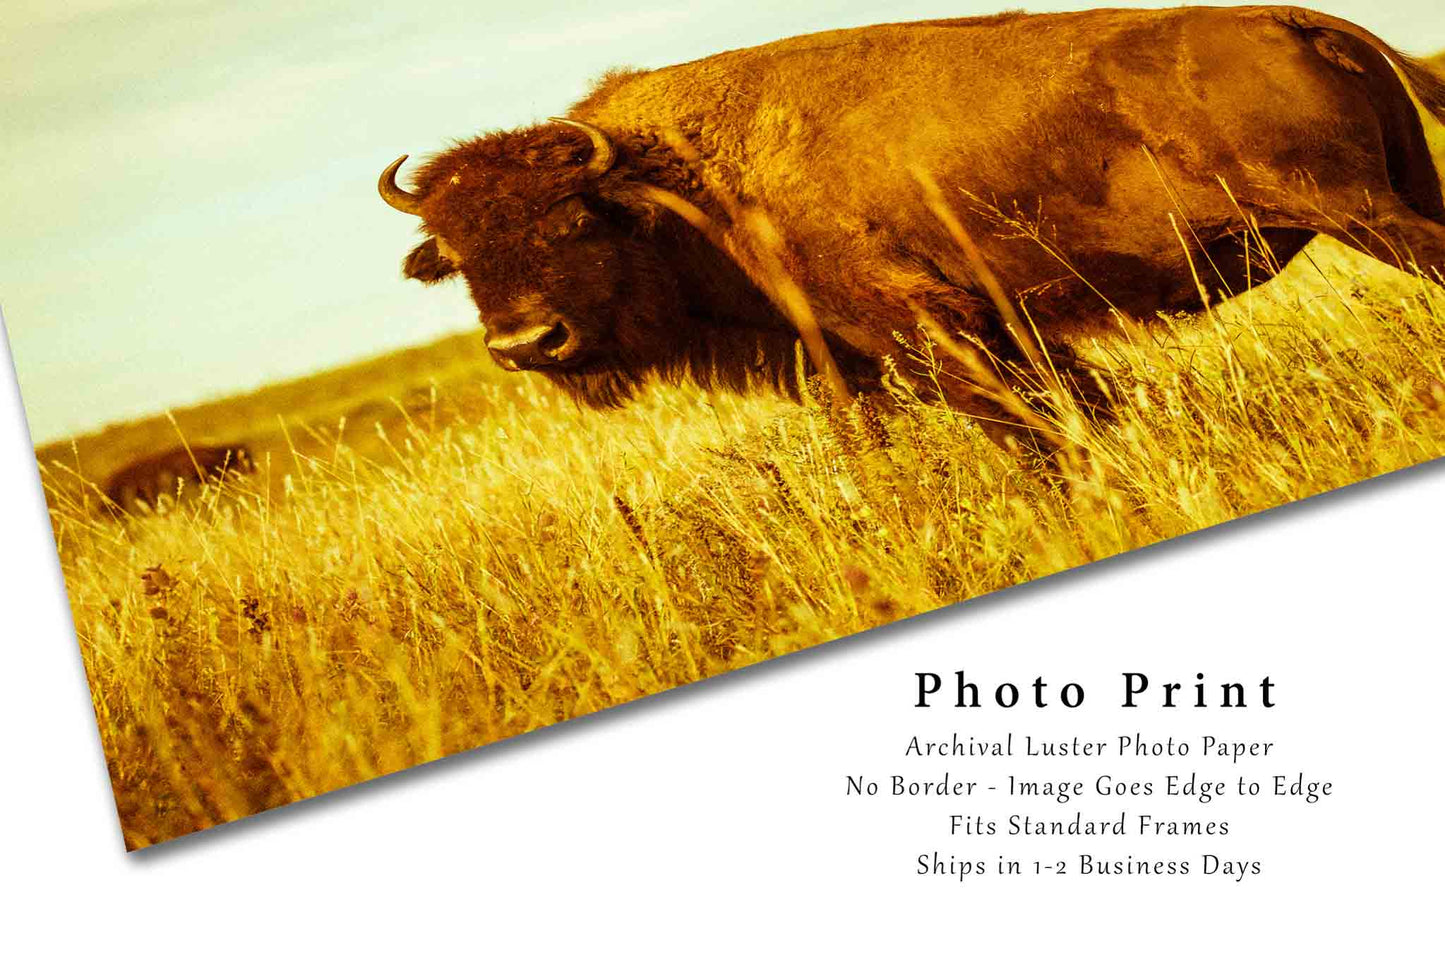 Buffalo Photography Print (Not Framed) Vintage Style Picture of Bison on Tallgrass Prairie in Oklahoma Wildlife Wall Art Western Decor